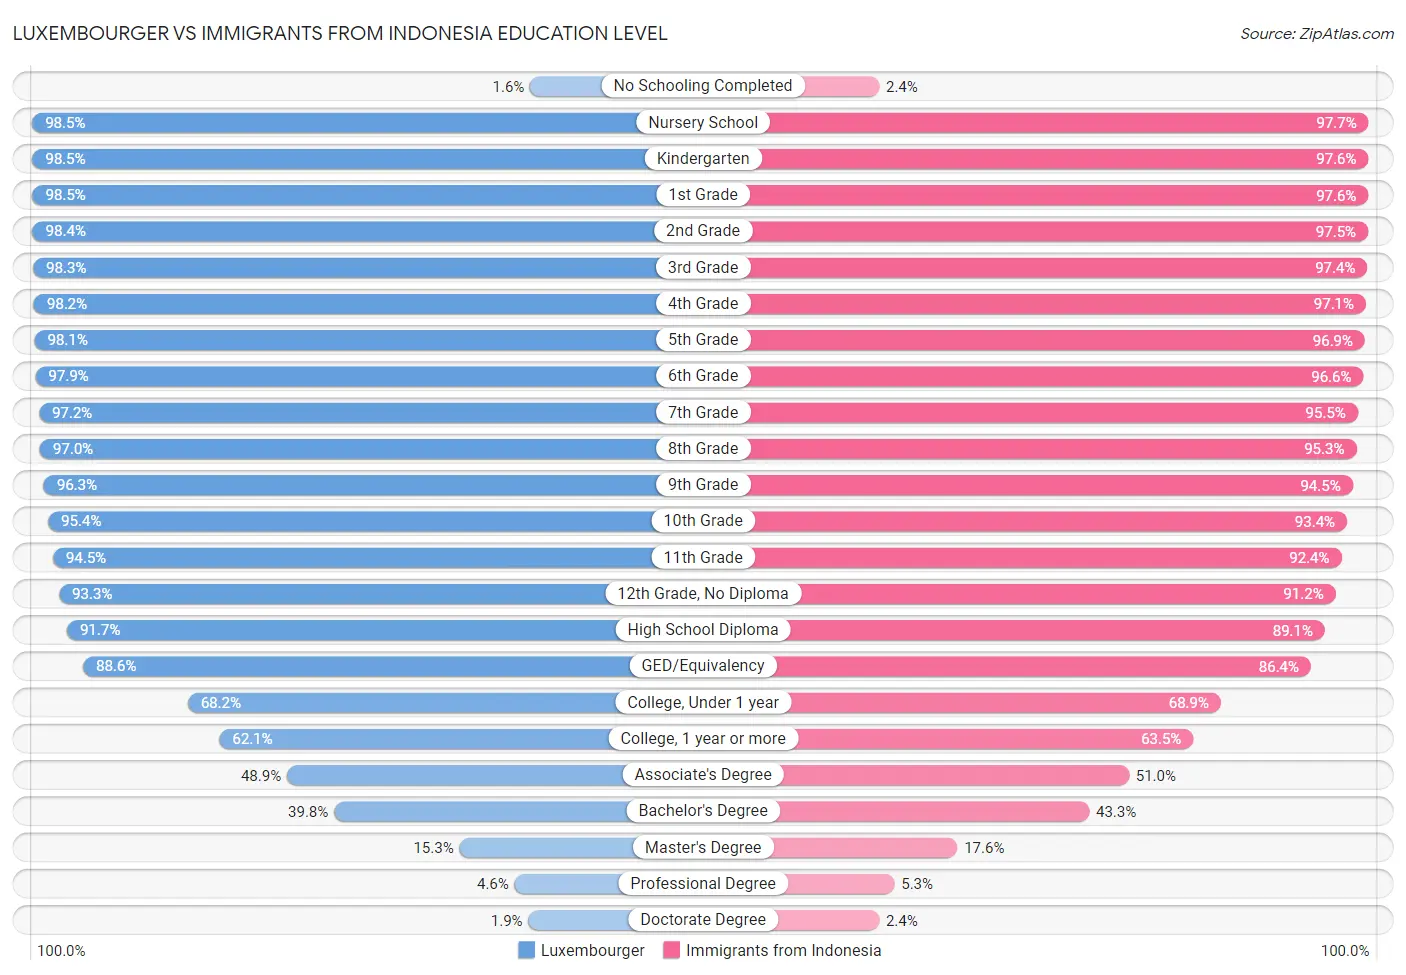 Luxembourger vs Immigrants from Indonesia Education Level